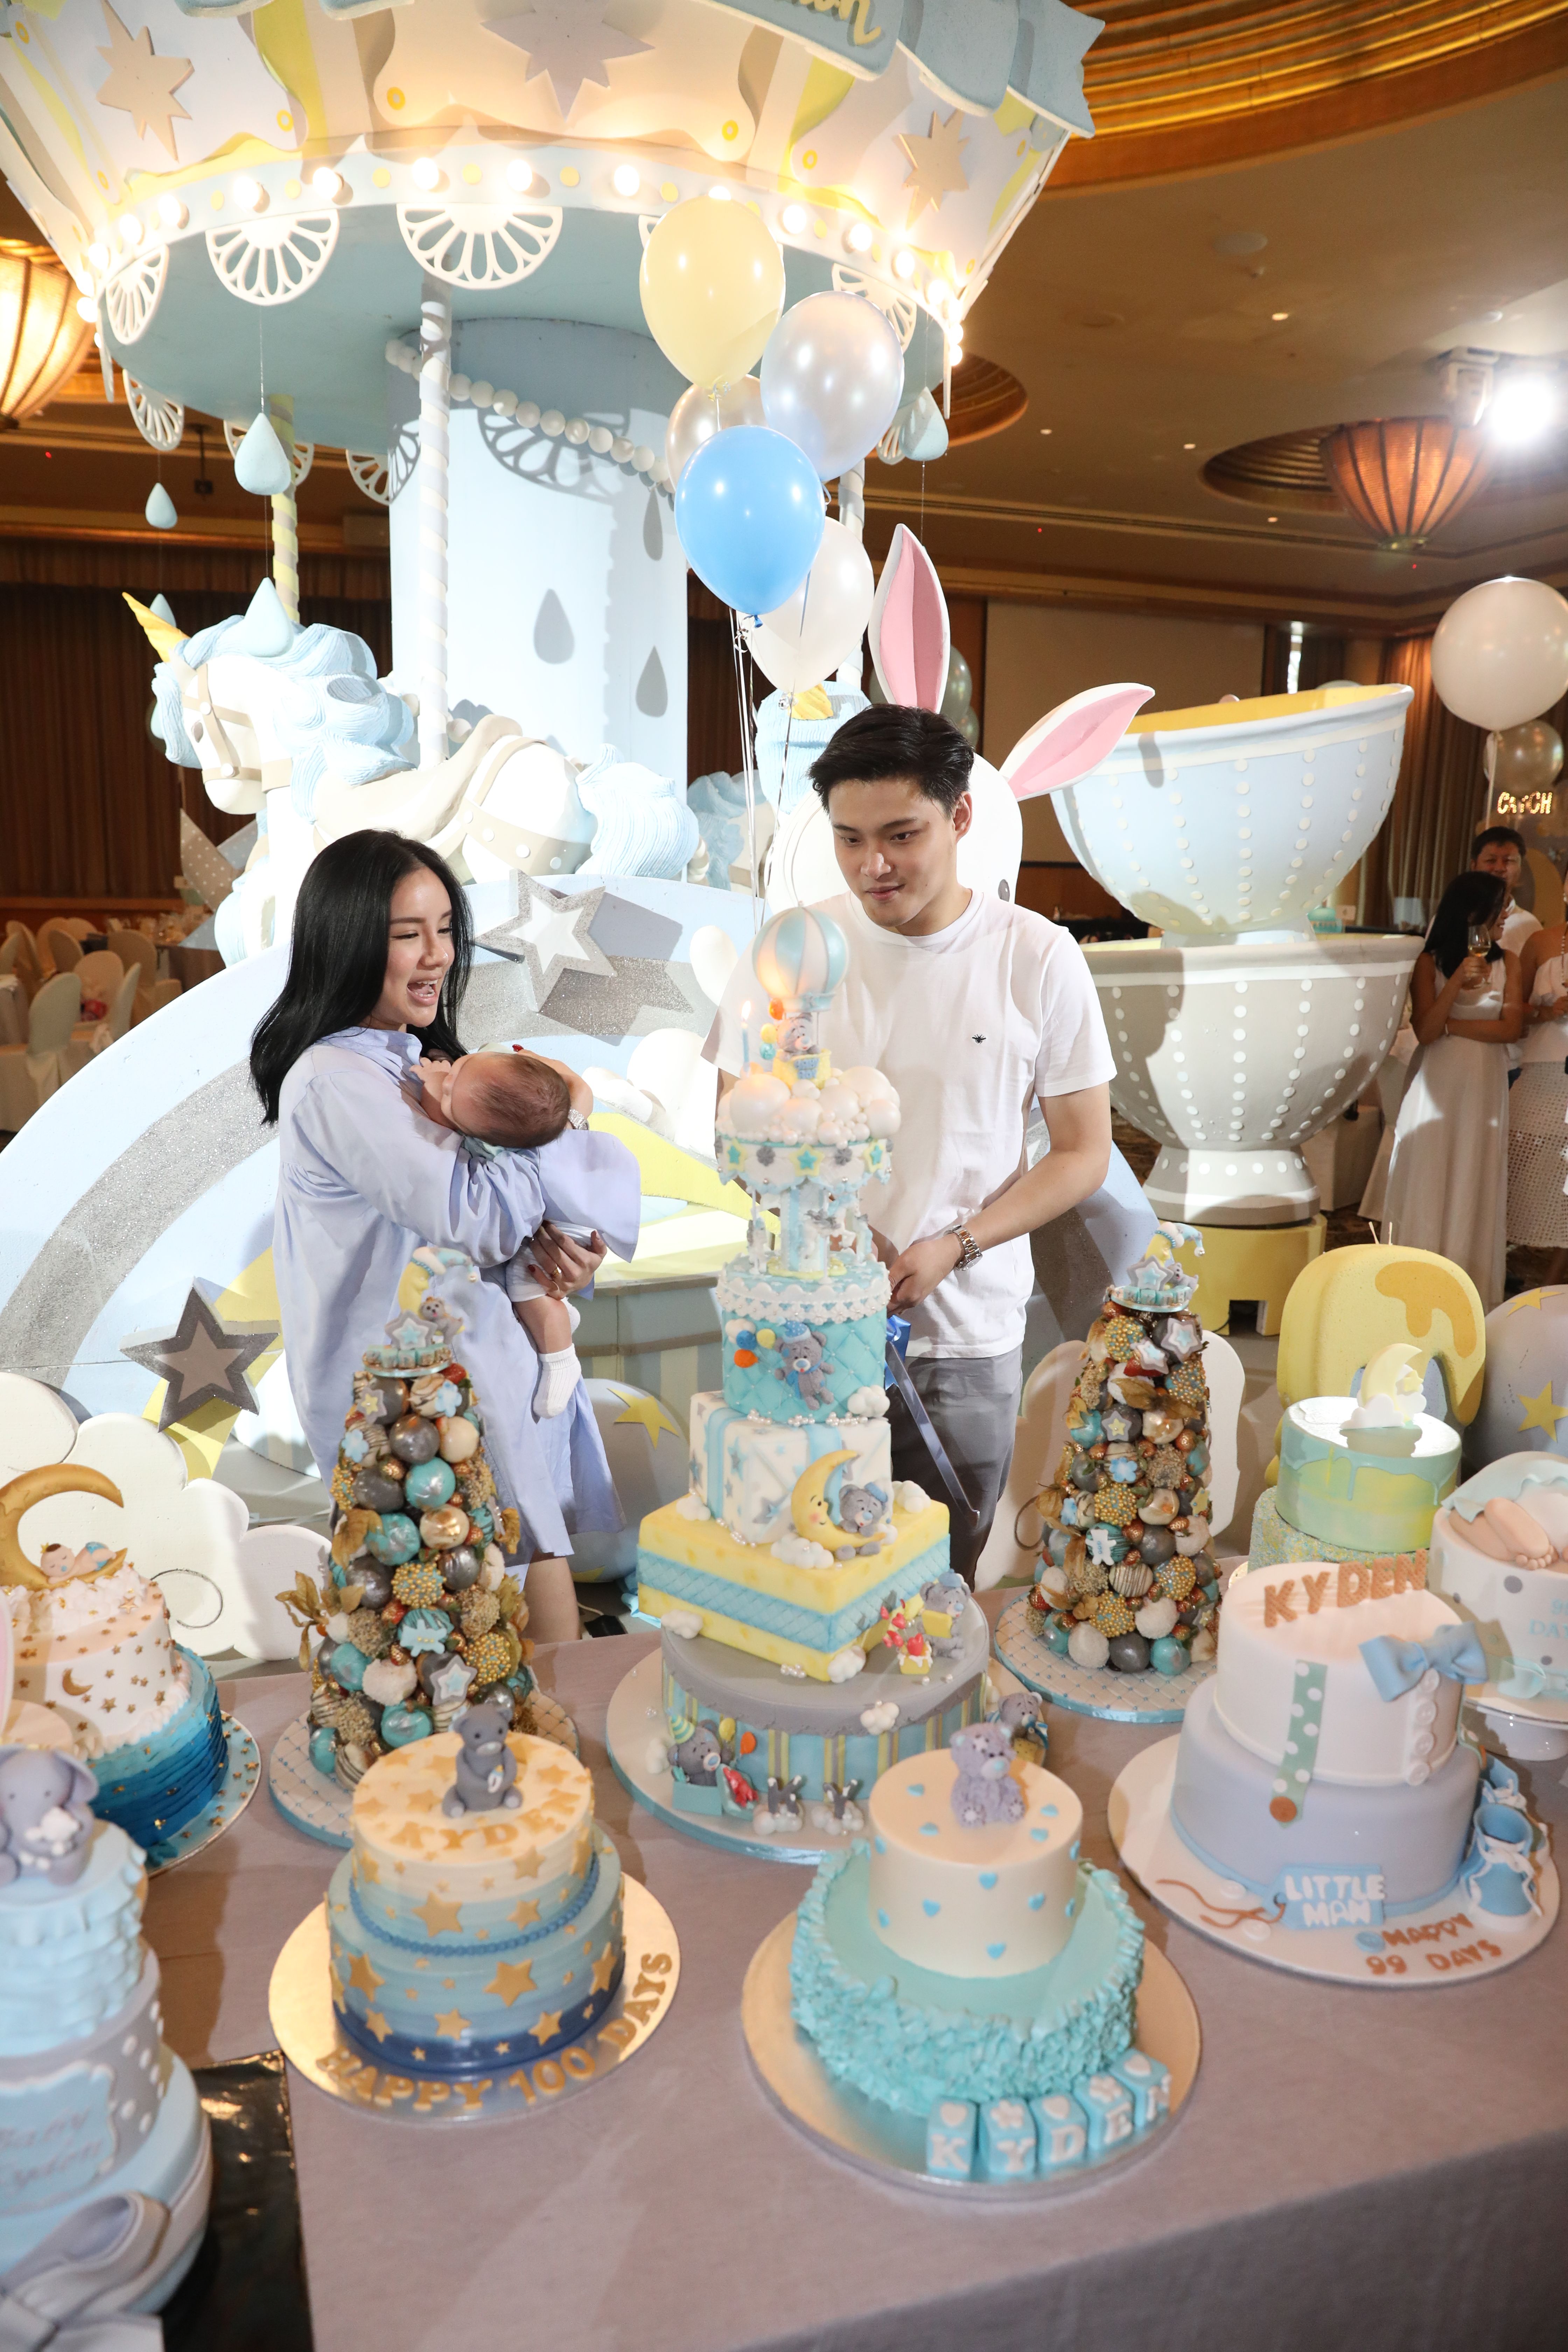 Kim Lim throws a 99th-day celebration party for son Kyden